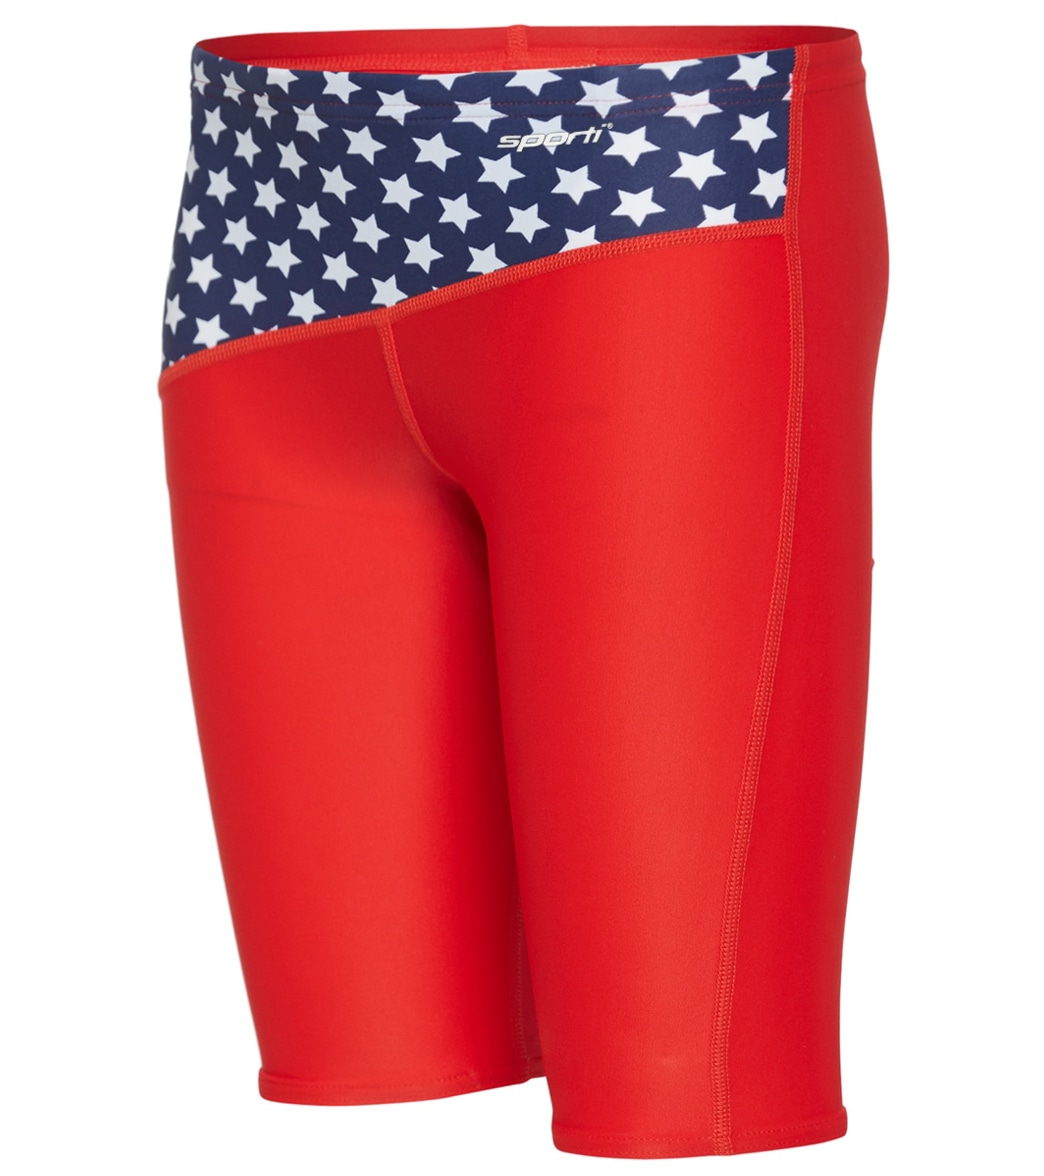 Sporti Star Spangled Jammer Swimsuit Youth 22-28 - Red/White/Blue 24Y - Swimoutlet.com